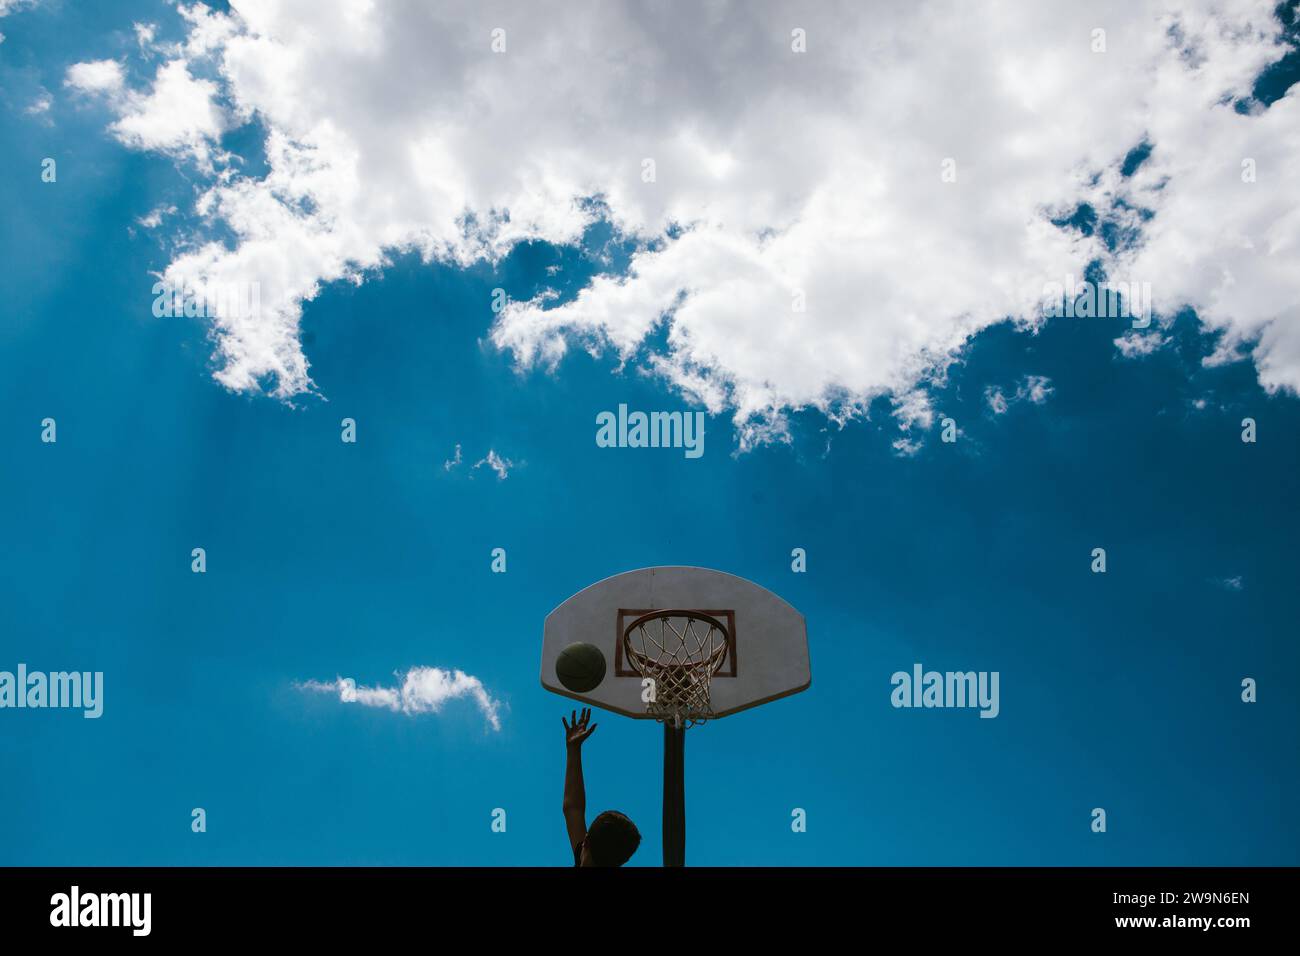 Boy making lay up at basketball hoop blue sky with clouds Stock Photo